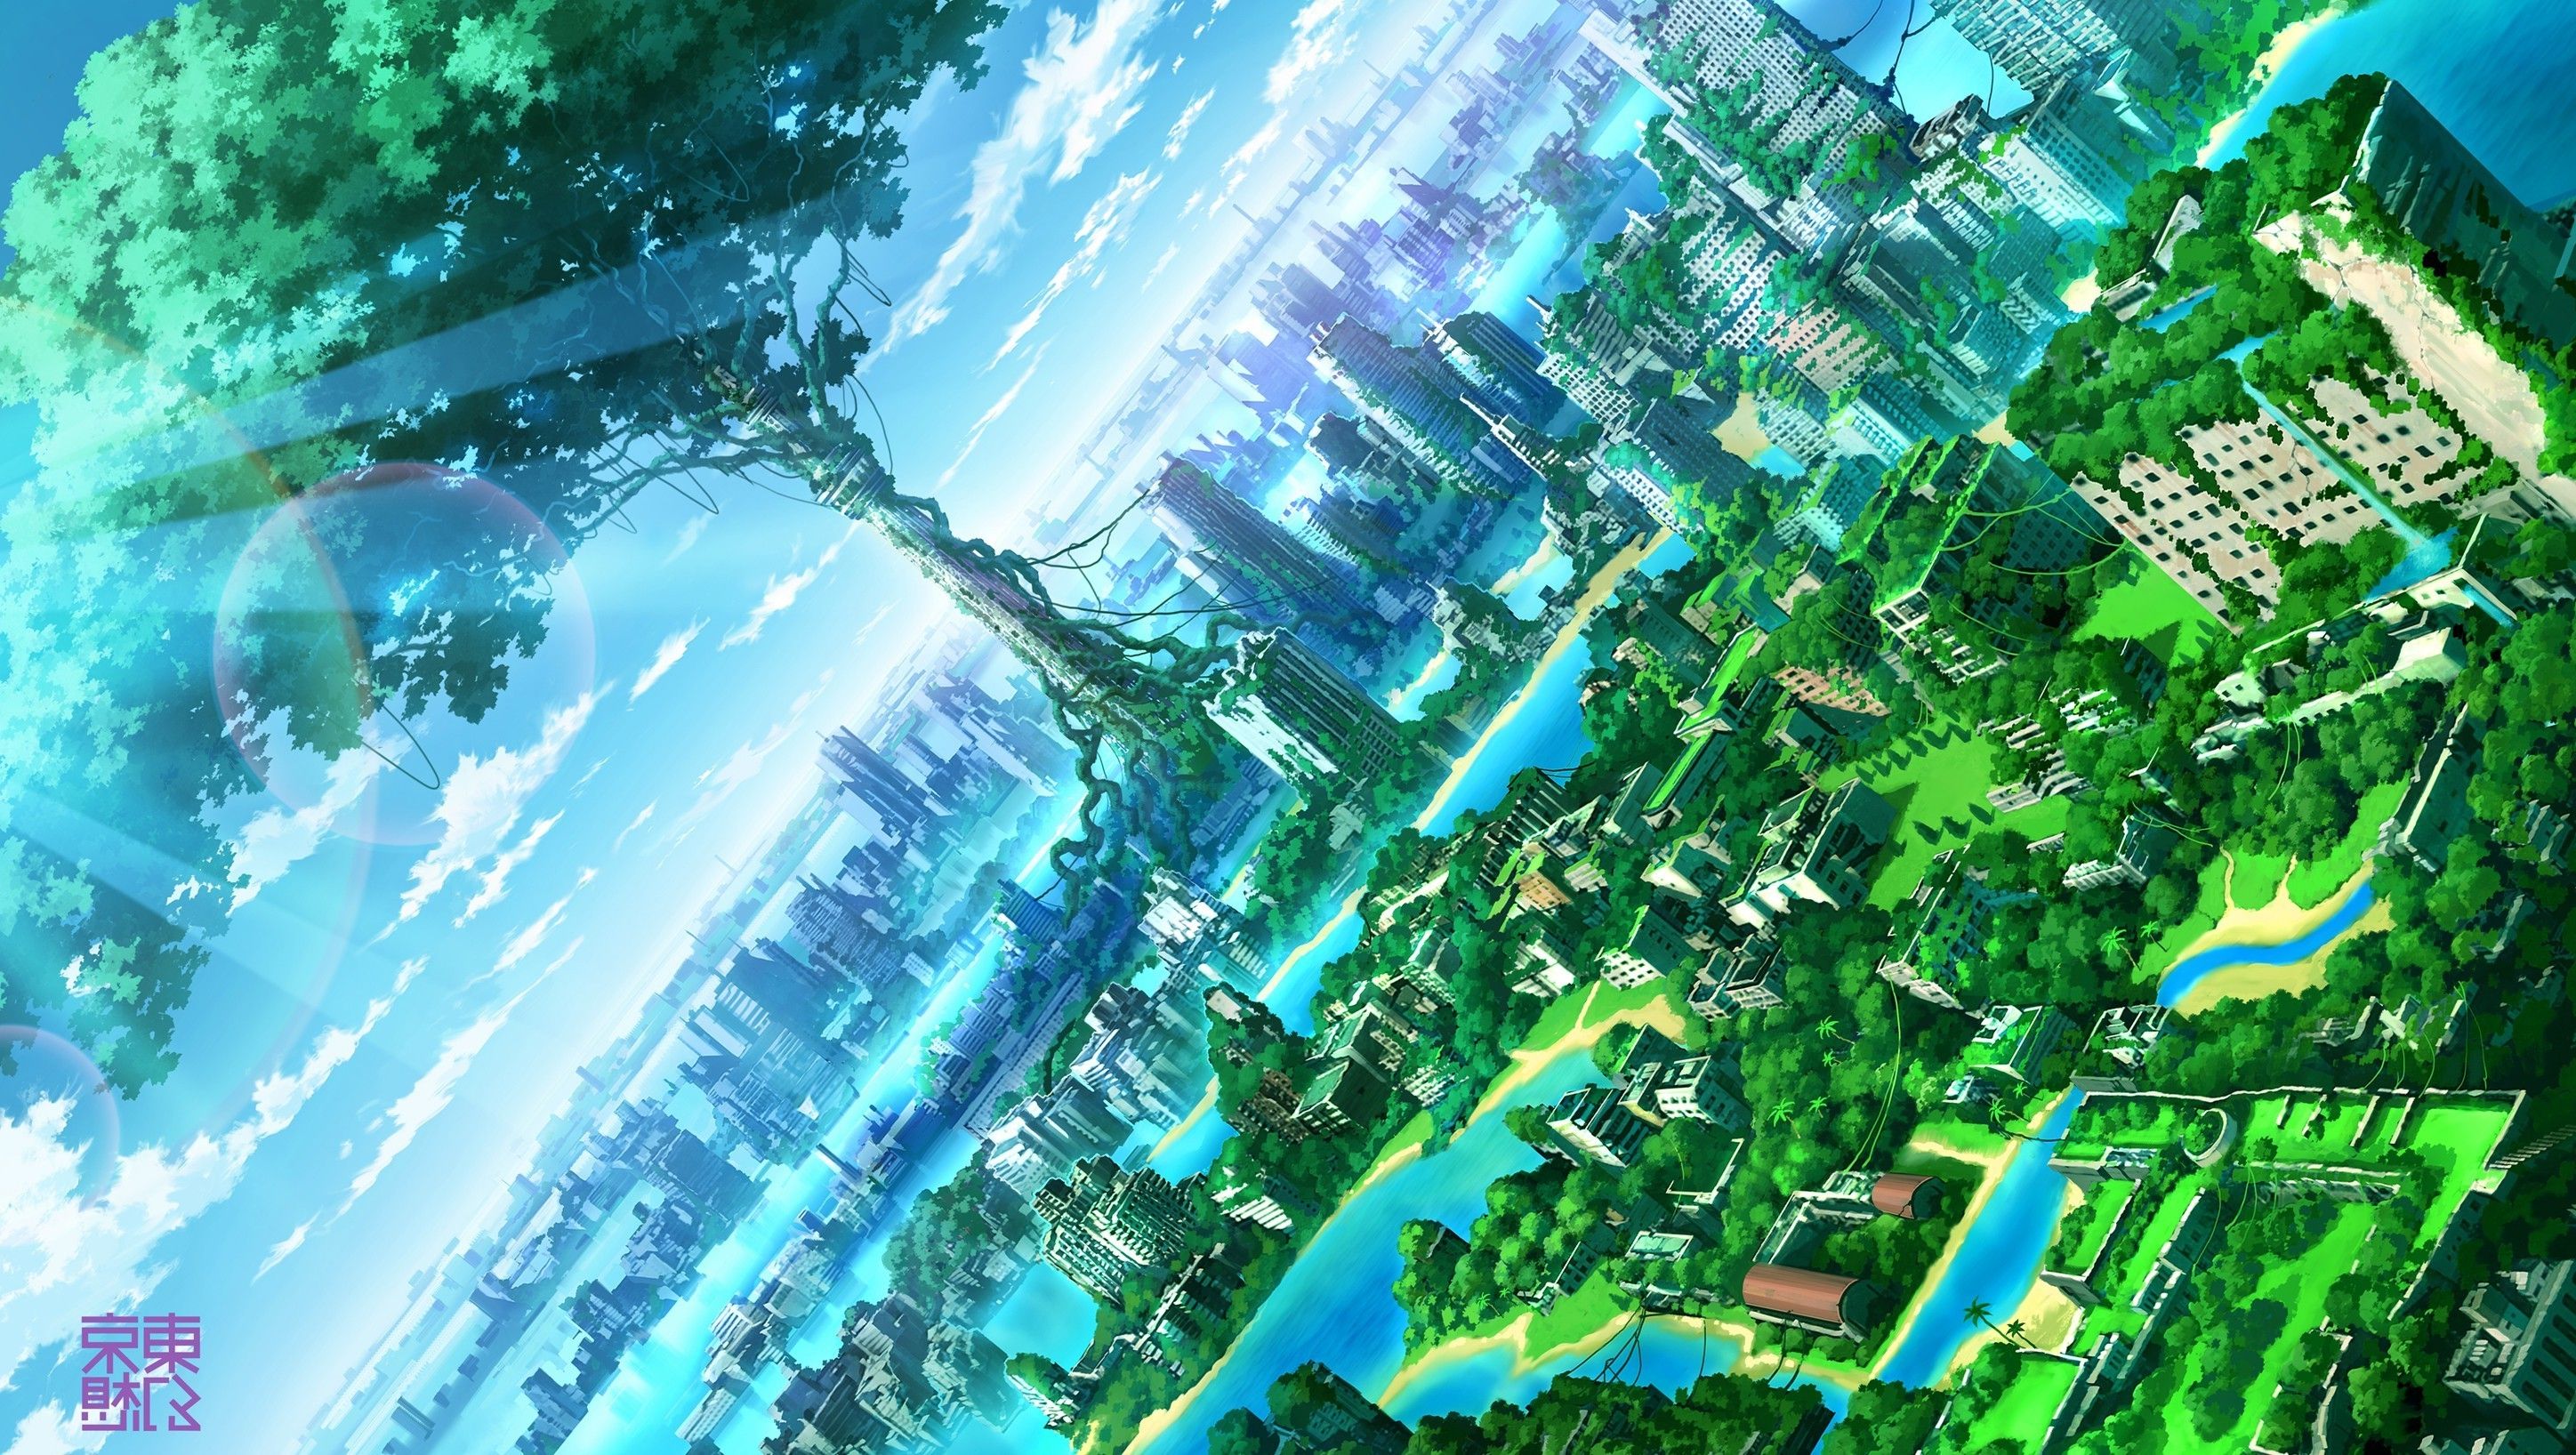 Anime 4K Hd City Wallpapers - Wallpaper Cave